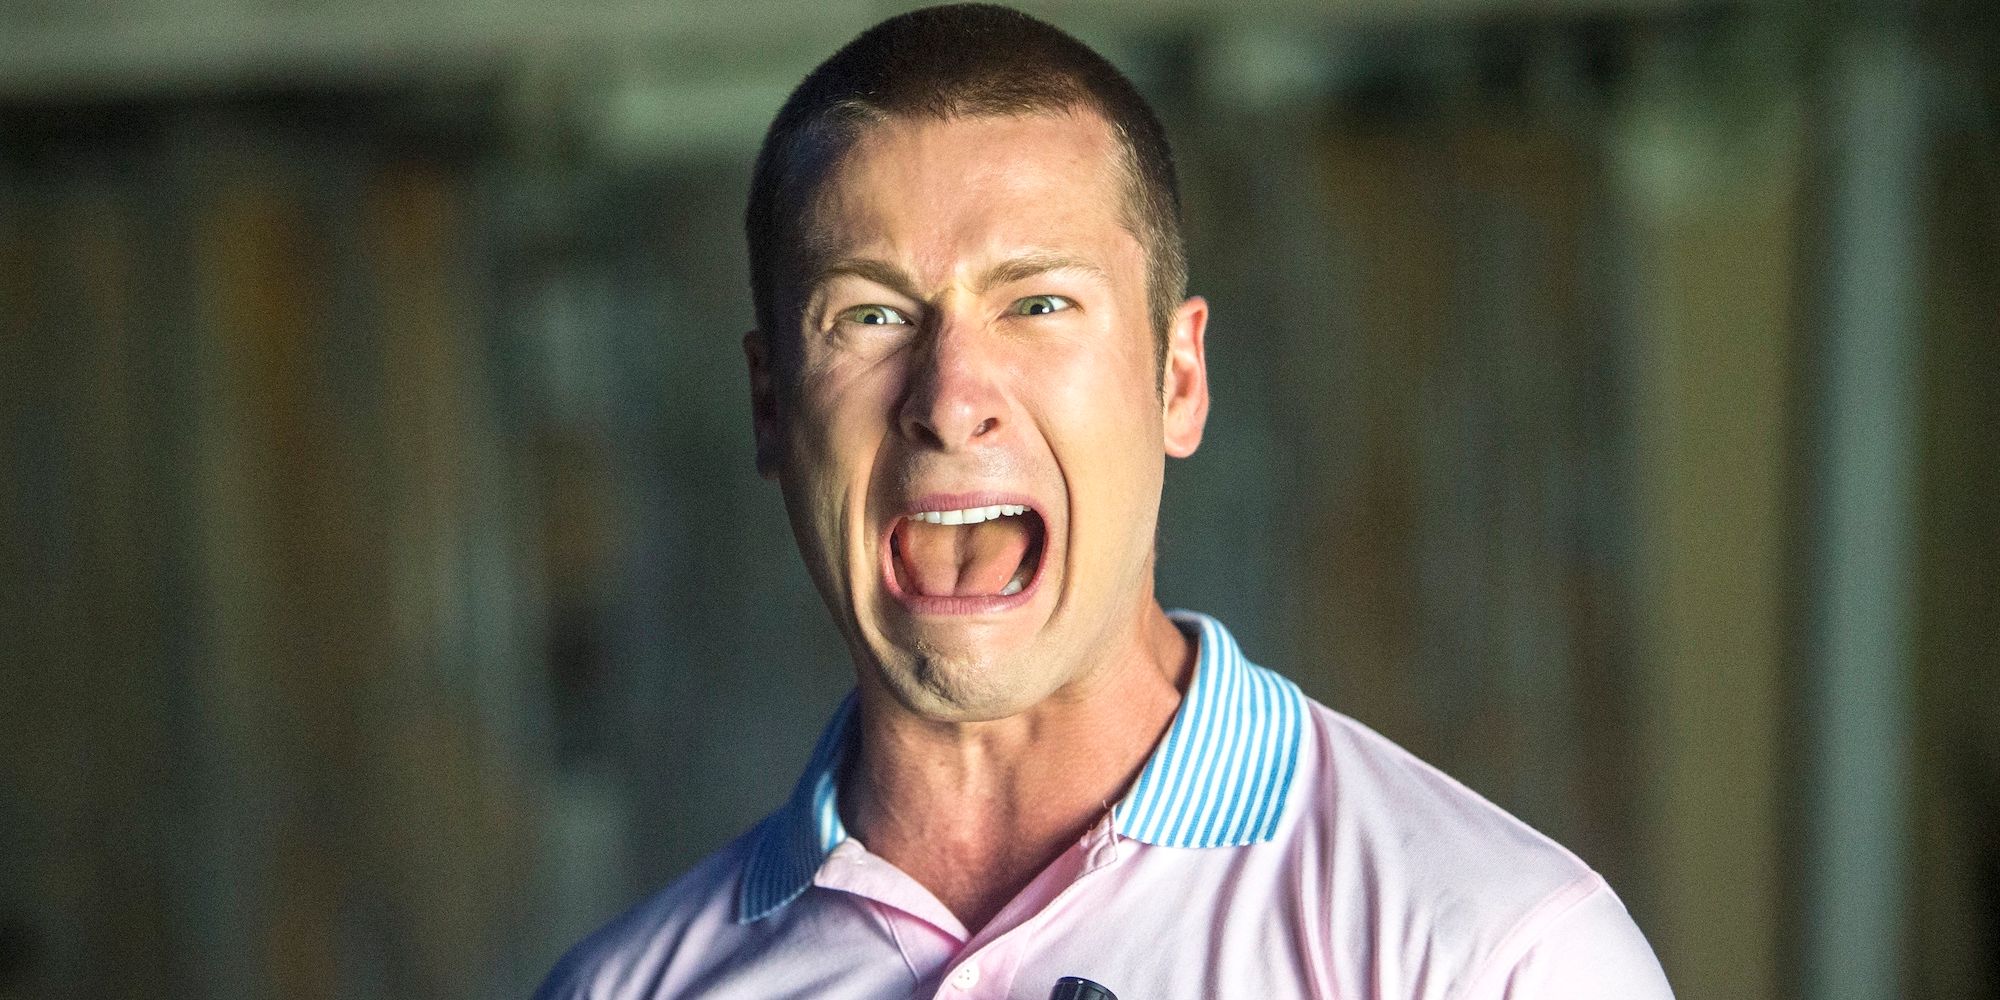 Glen Powell as Chad screaming in Scream Queens